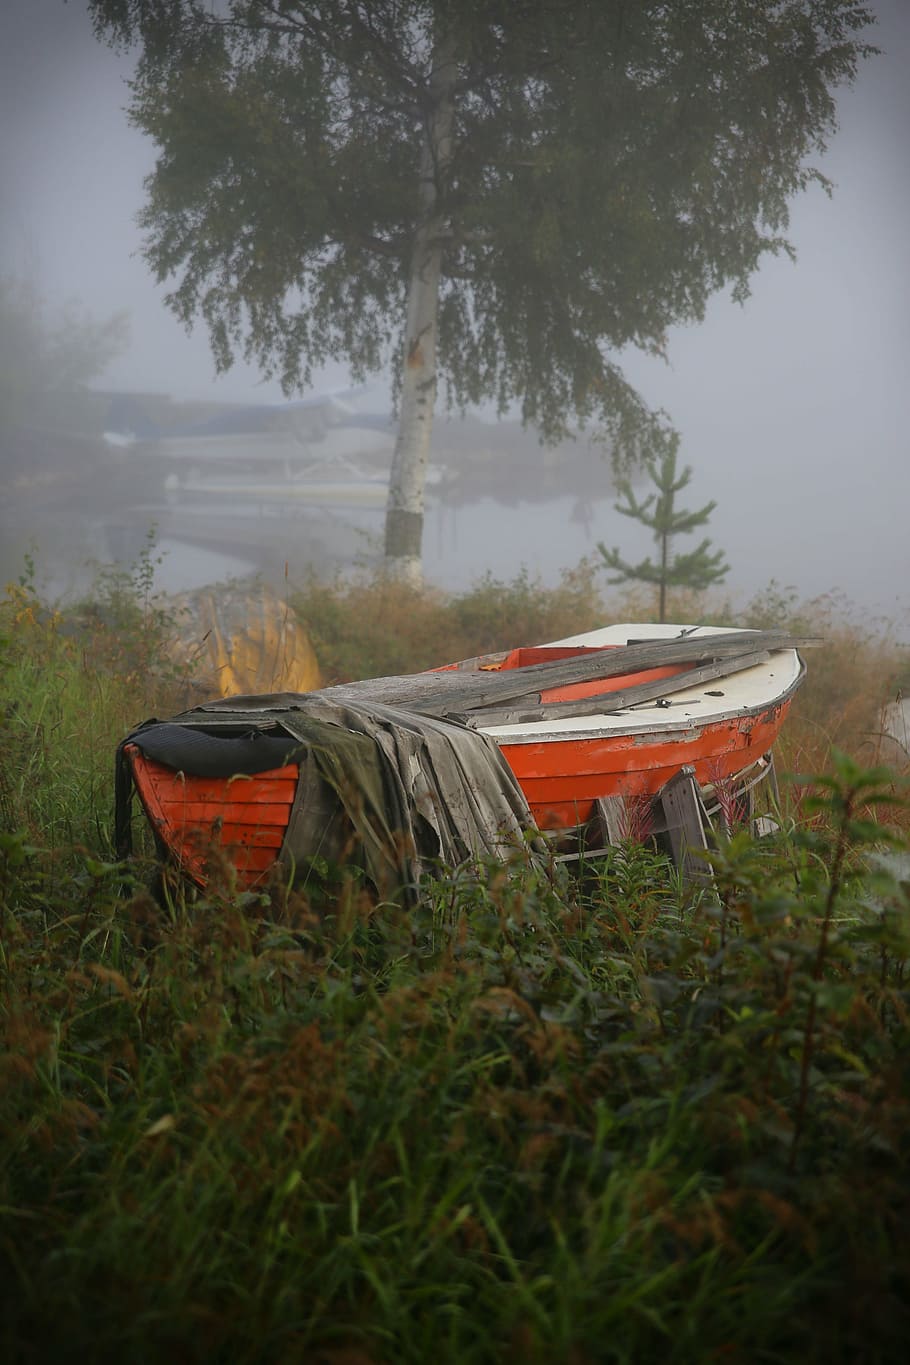 boat, aircraft, mist, lake, morning, landscapes, outdoors, nature, plant, nautical vessel